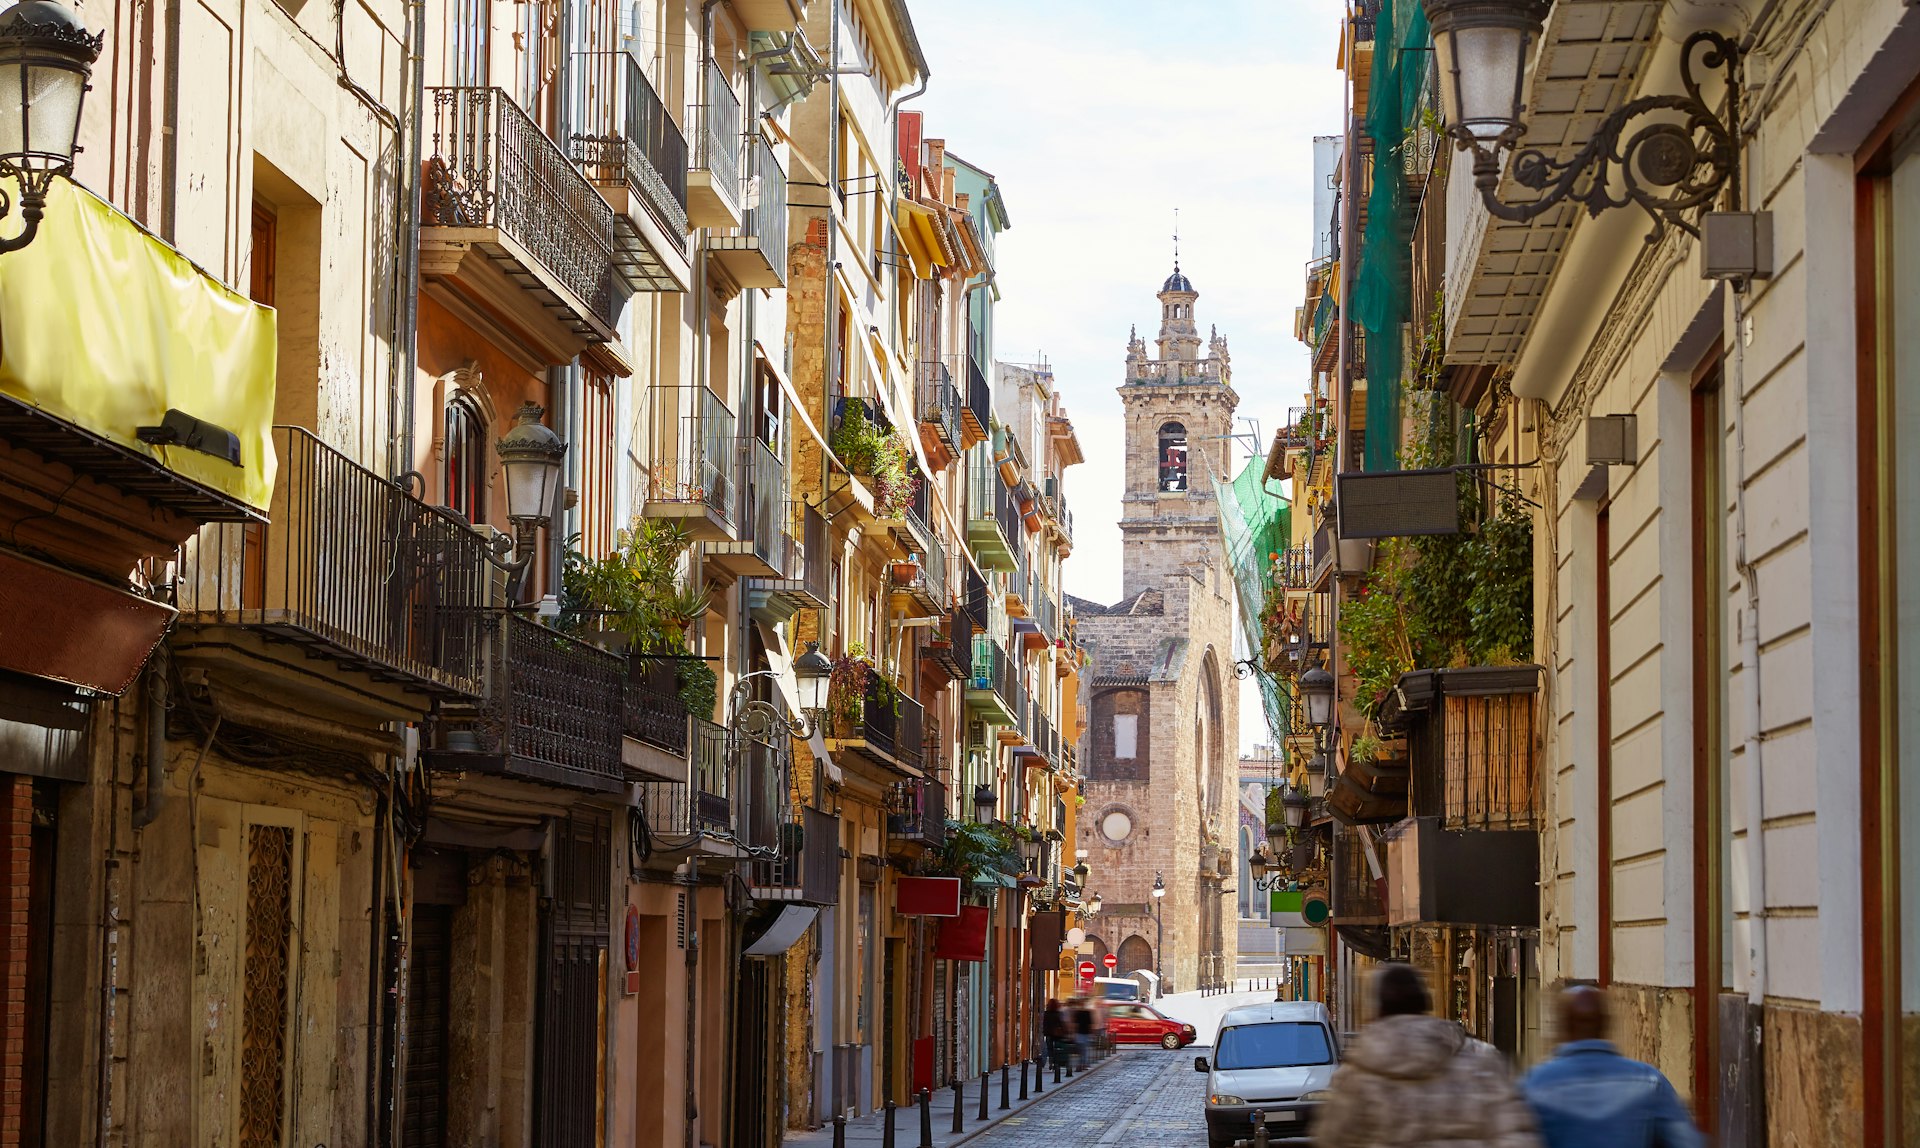 Buildings lining narrow Bolseria Street in Barrio del Carmen, with a church in the background and two blurry people in the foreground